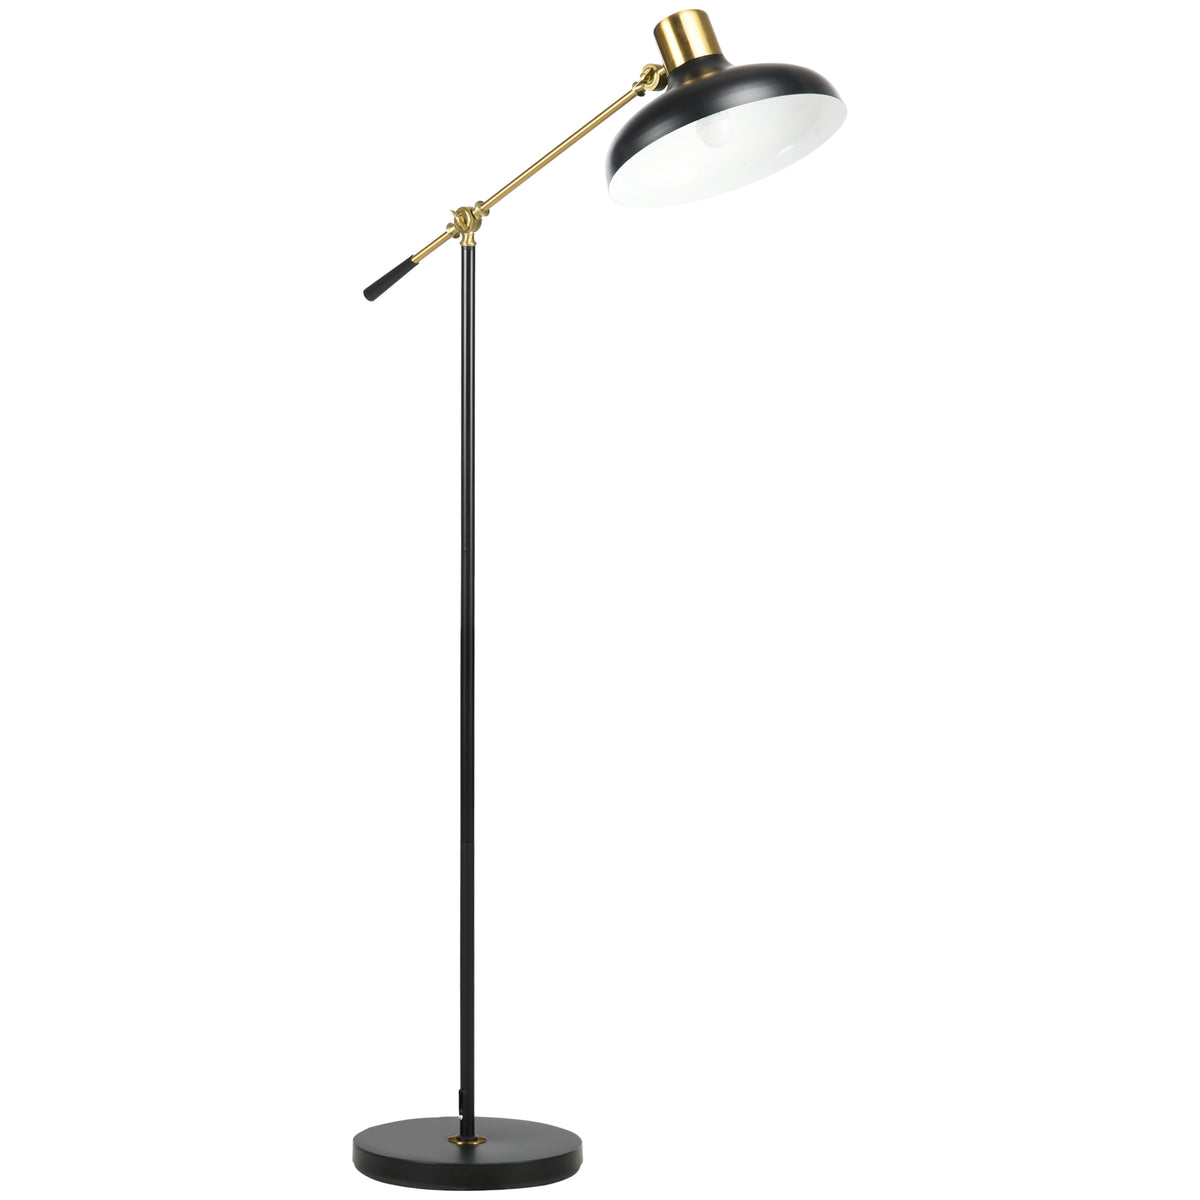 Adjustable Floor Lamps for Living Room, Standing Lamp for Bedroom with Balance Arm, Adjustable Head and Height, Tall Black and Gold Lamp (Bulb not Included)